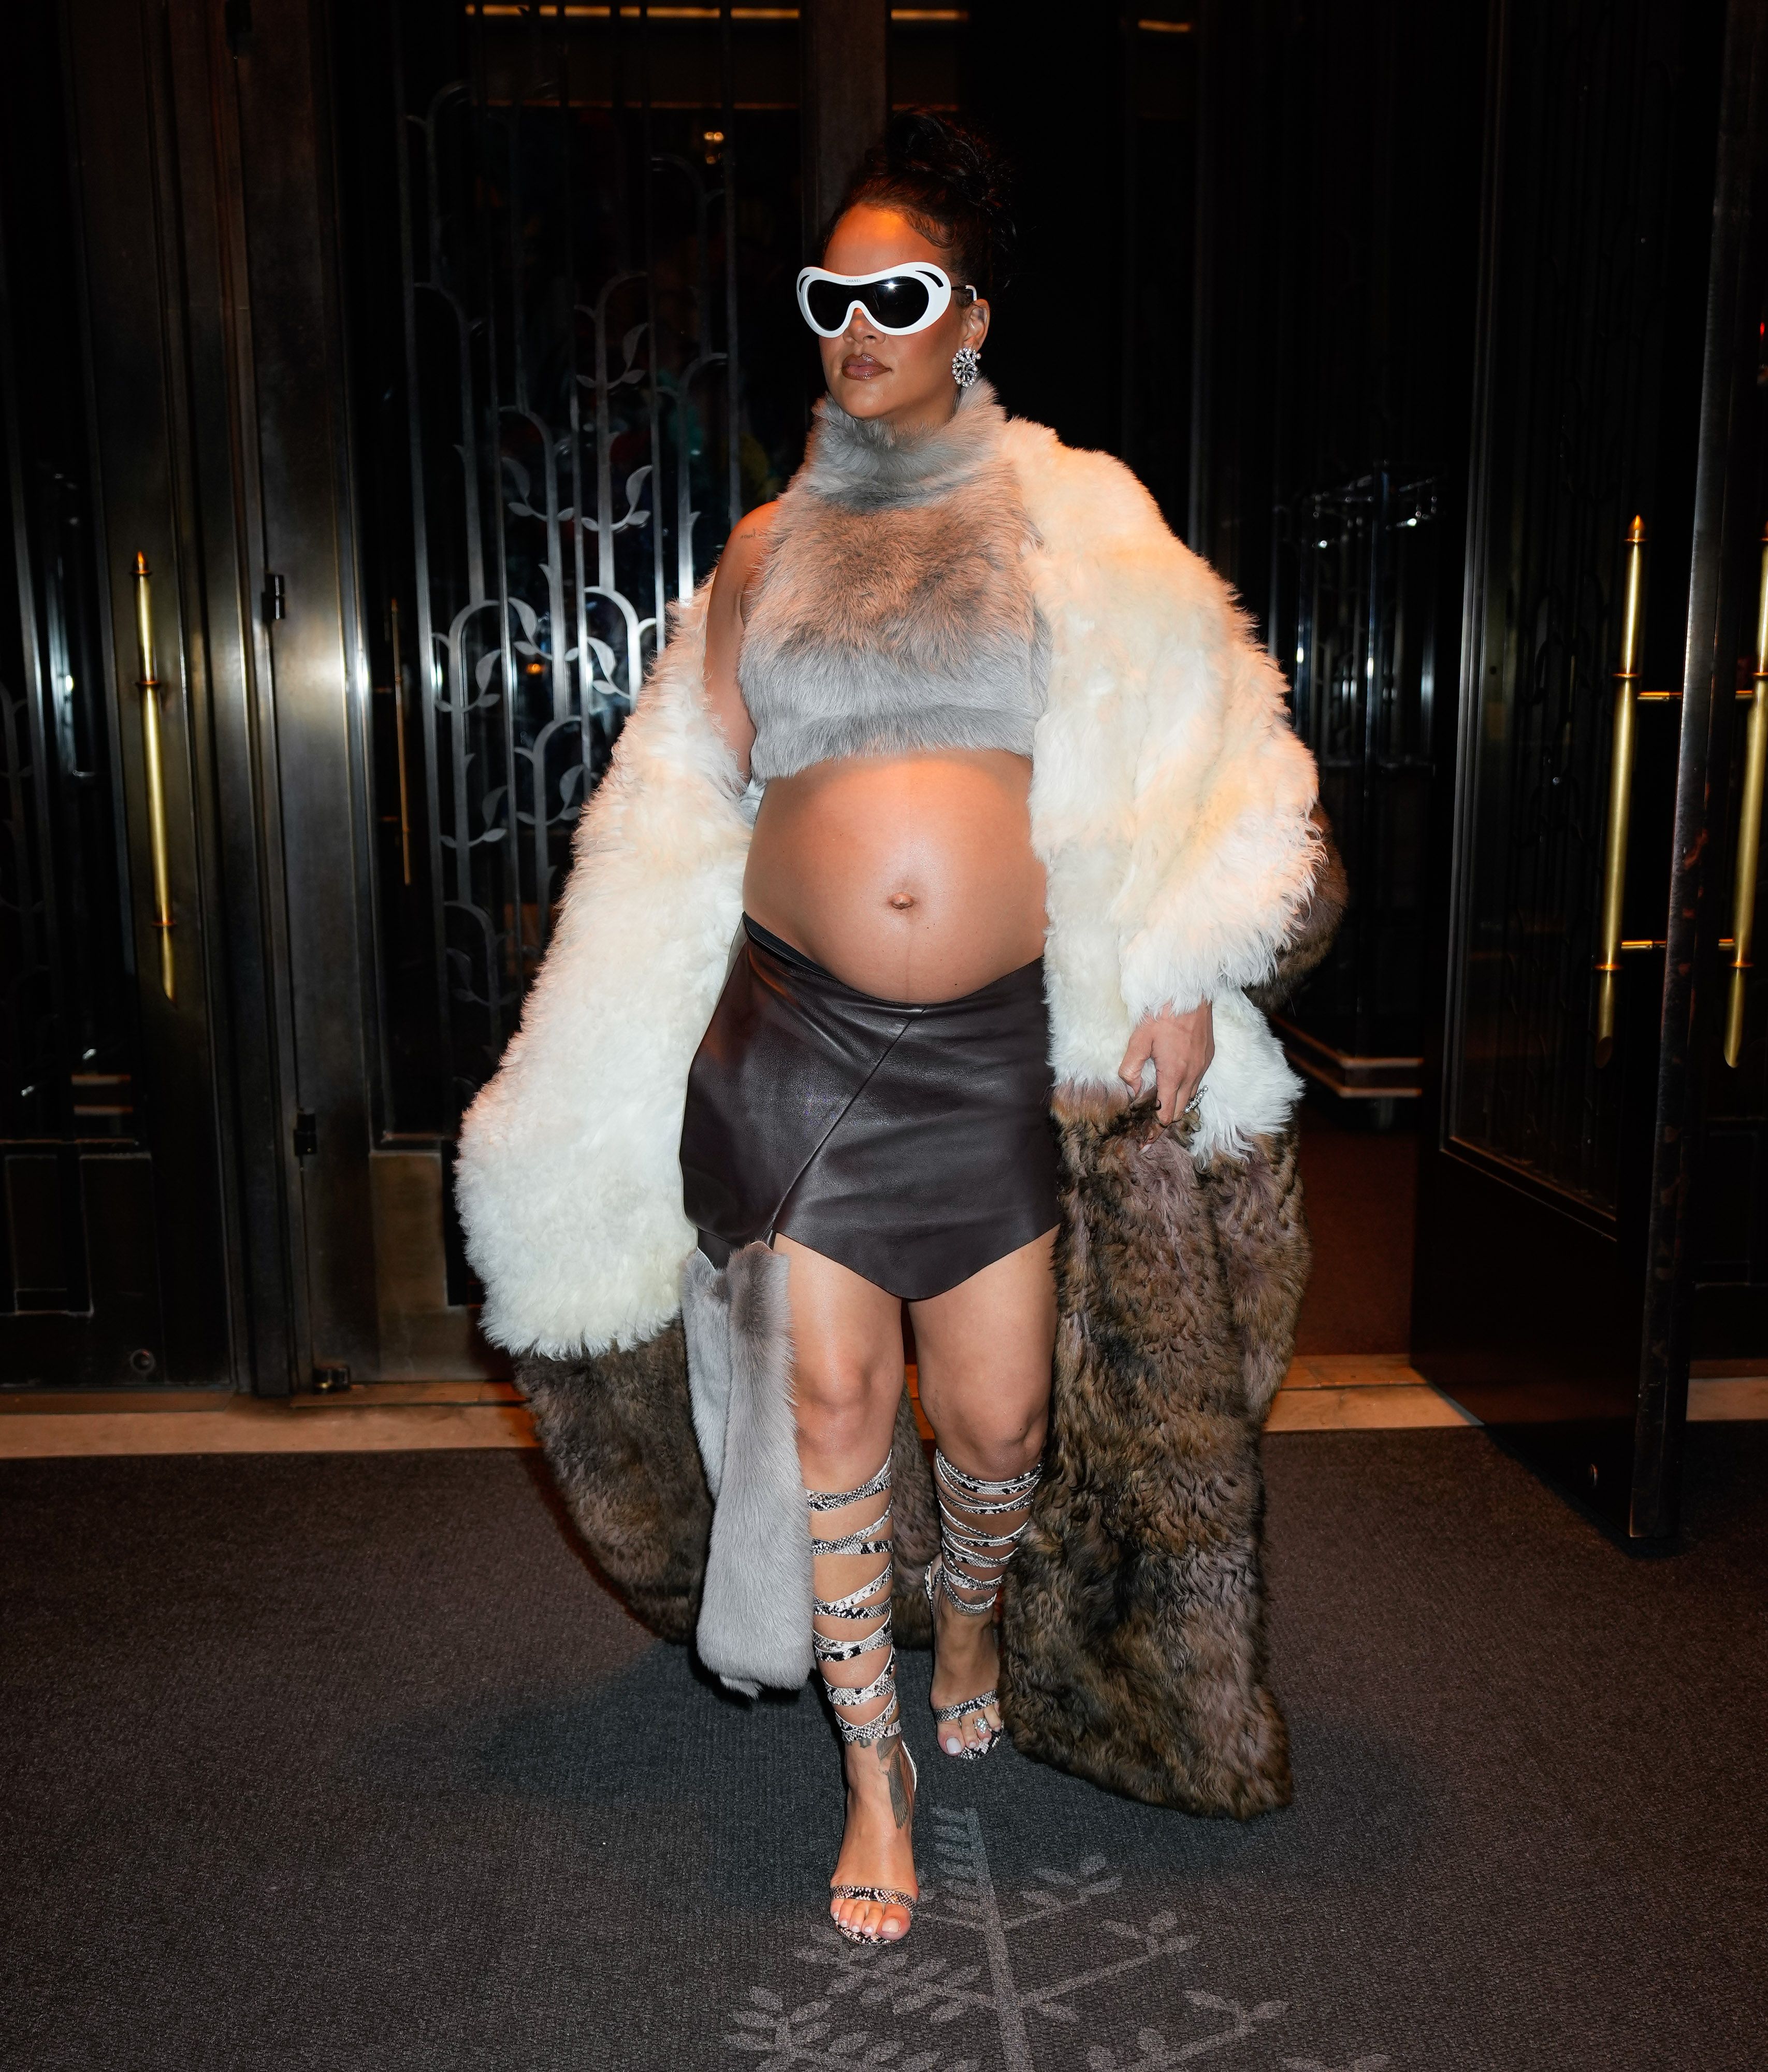 Rihannas Second Pregnancy Details Due Date, Announcement, Baby Sex, and More